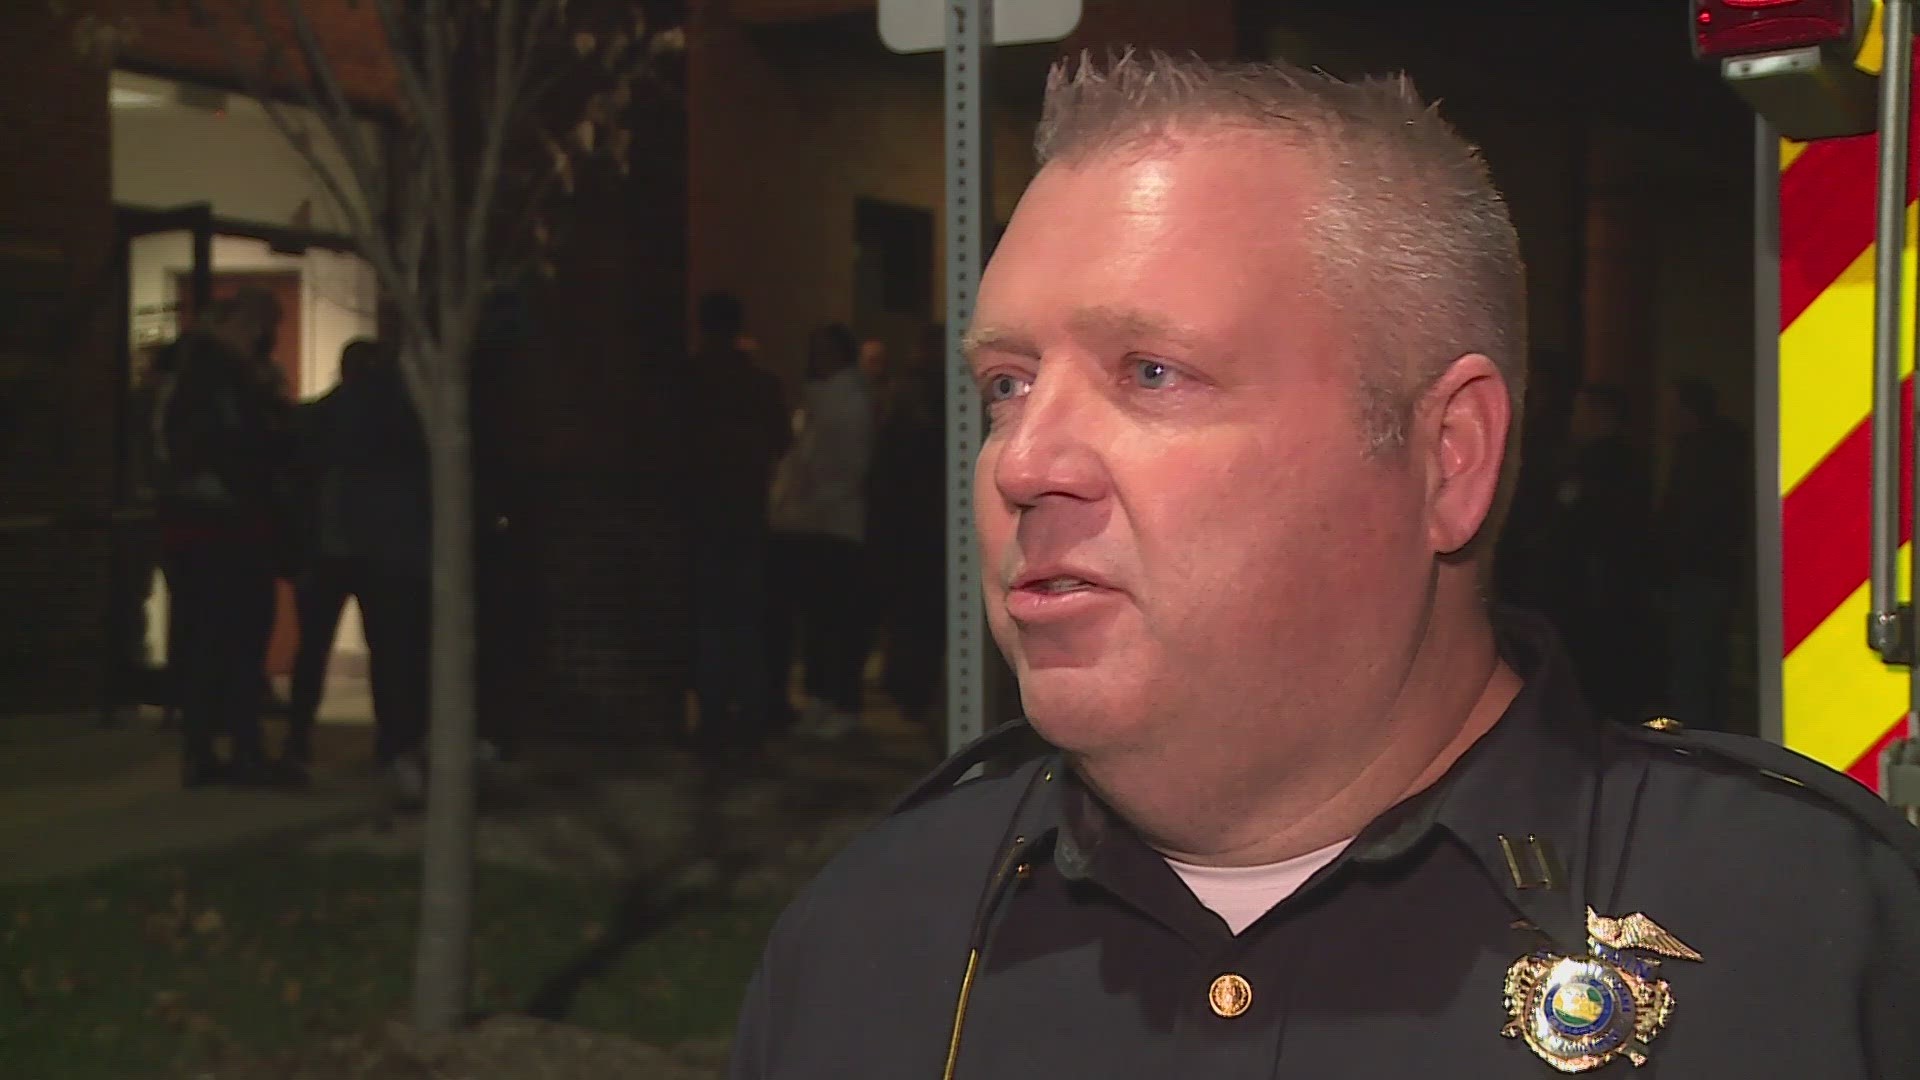 There was turmoil following the removal of a well-liked police chief in Clarksville. The decision to move former Chief Mark Palmer has gained harsh criticism.